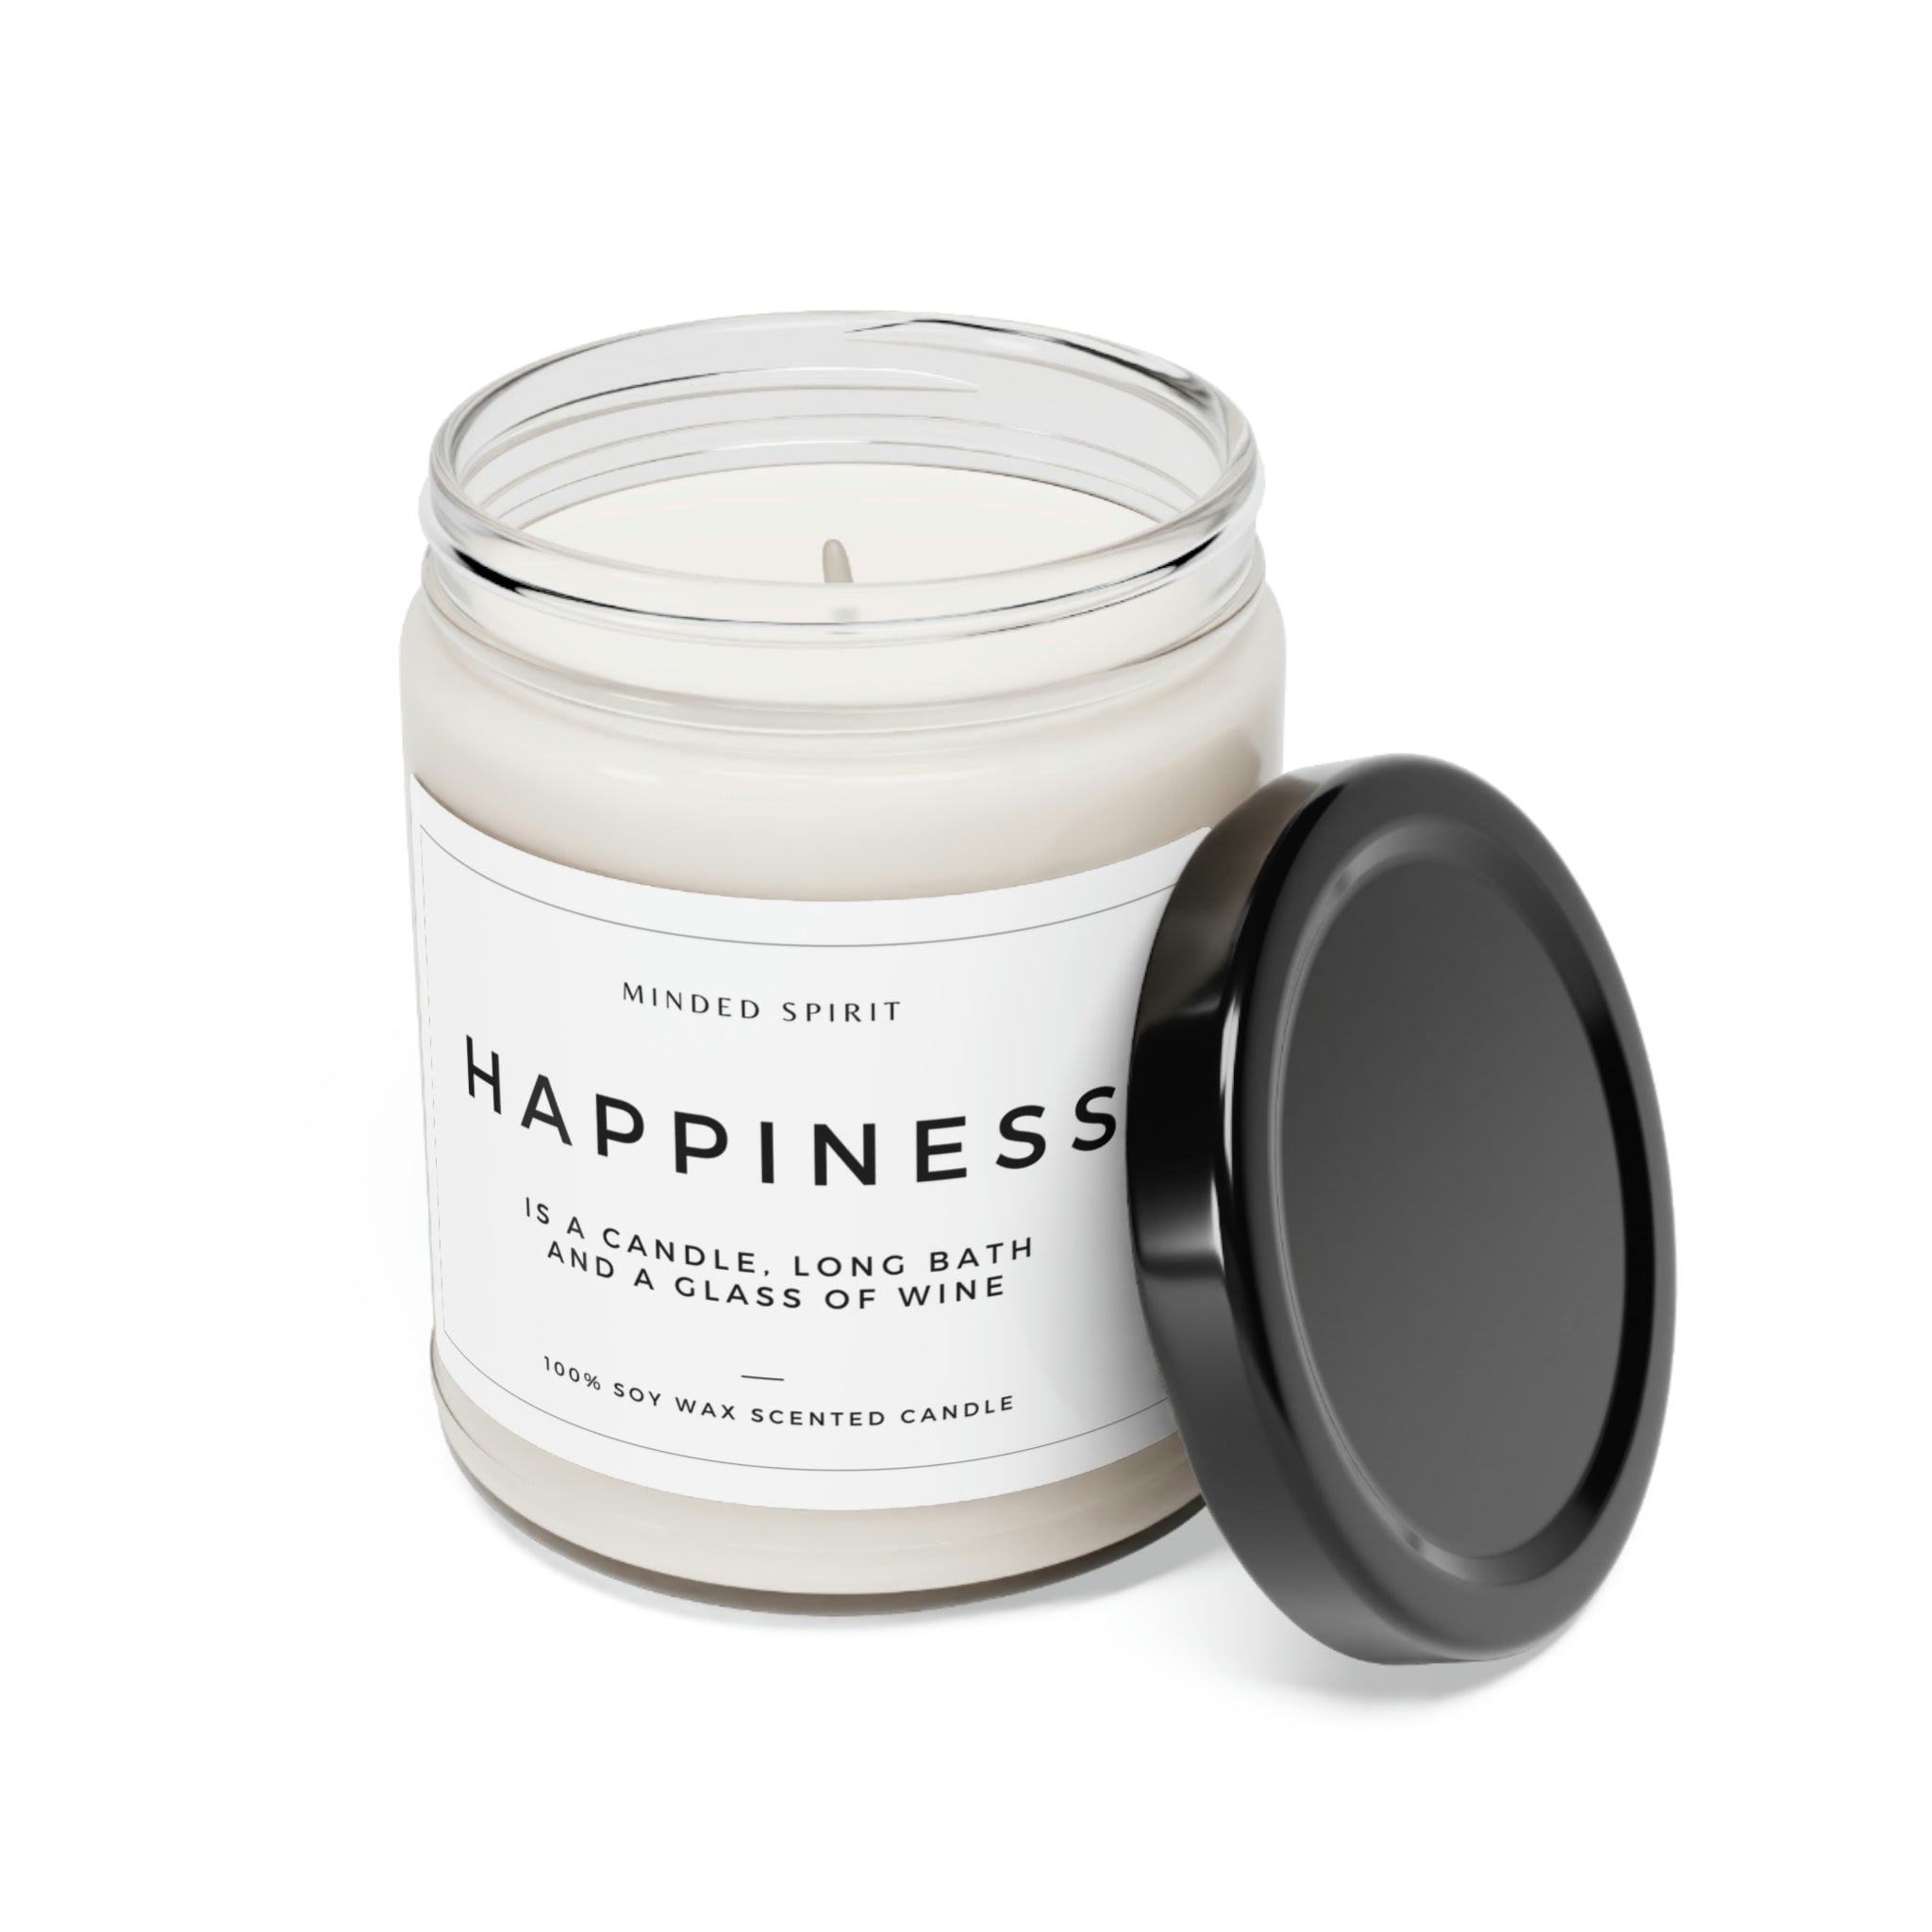 Happiness Sassy Self-Help Scented Candle